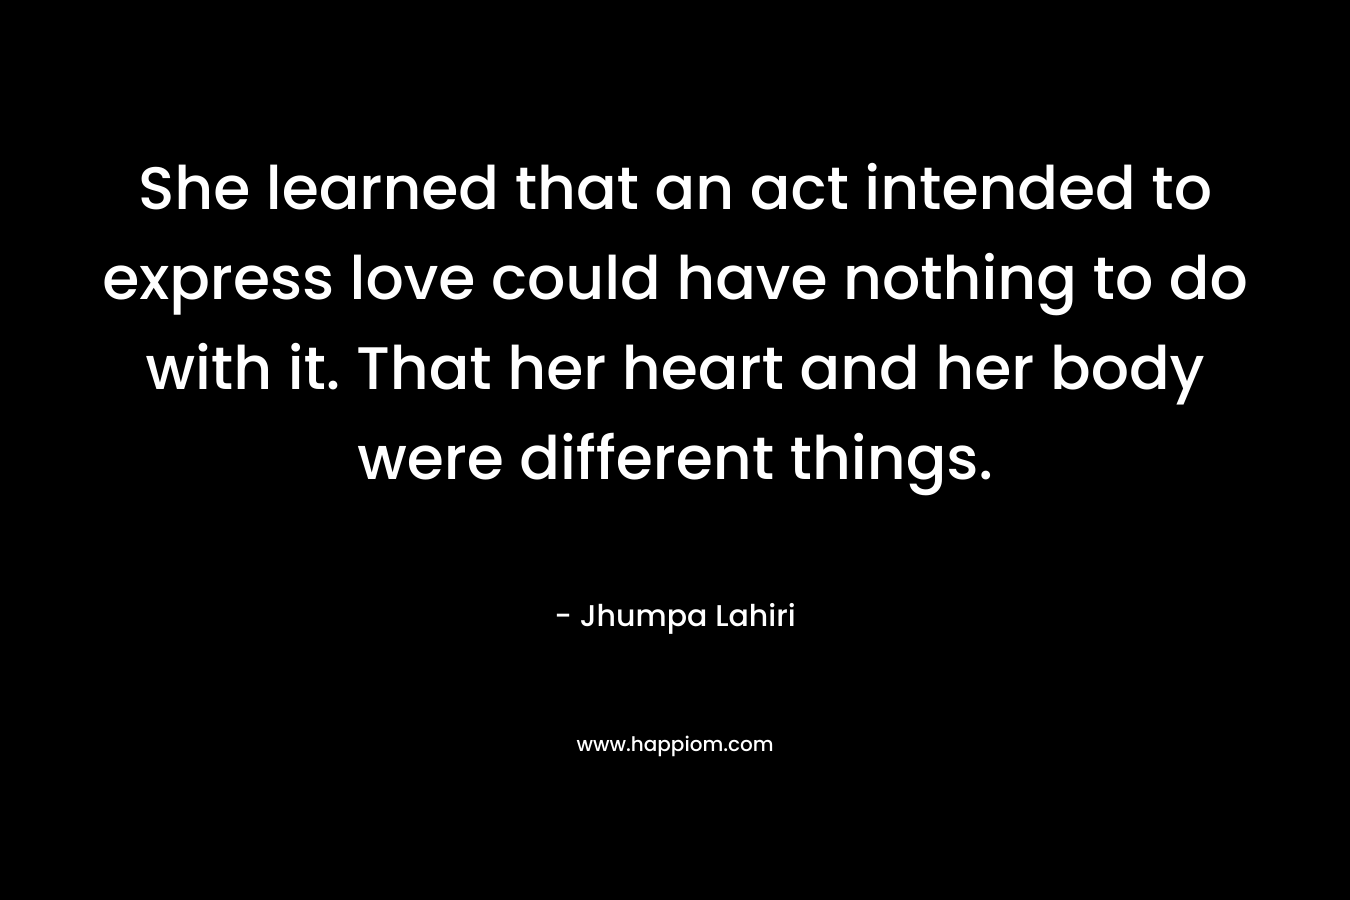 She learned that an act intended to express love could have nothing to do with it. That her heart and her body were different things. – Jhumpa Lahiri